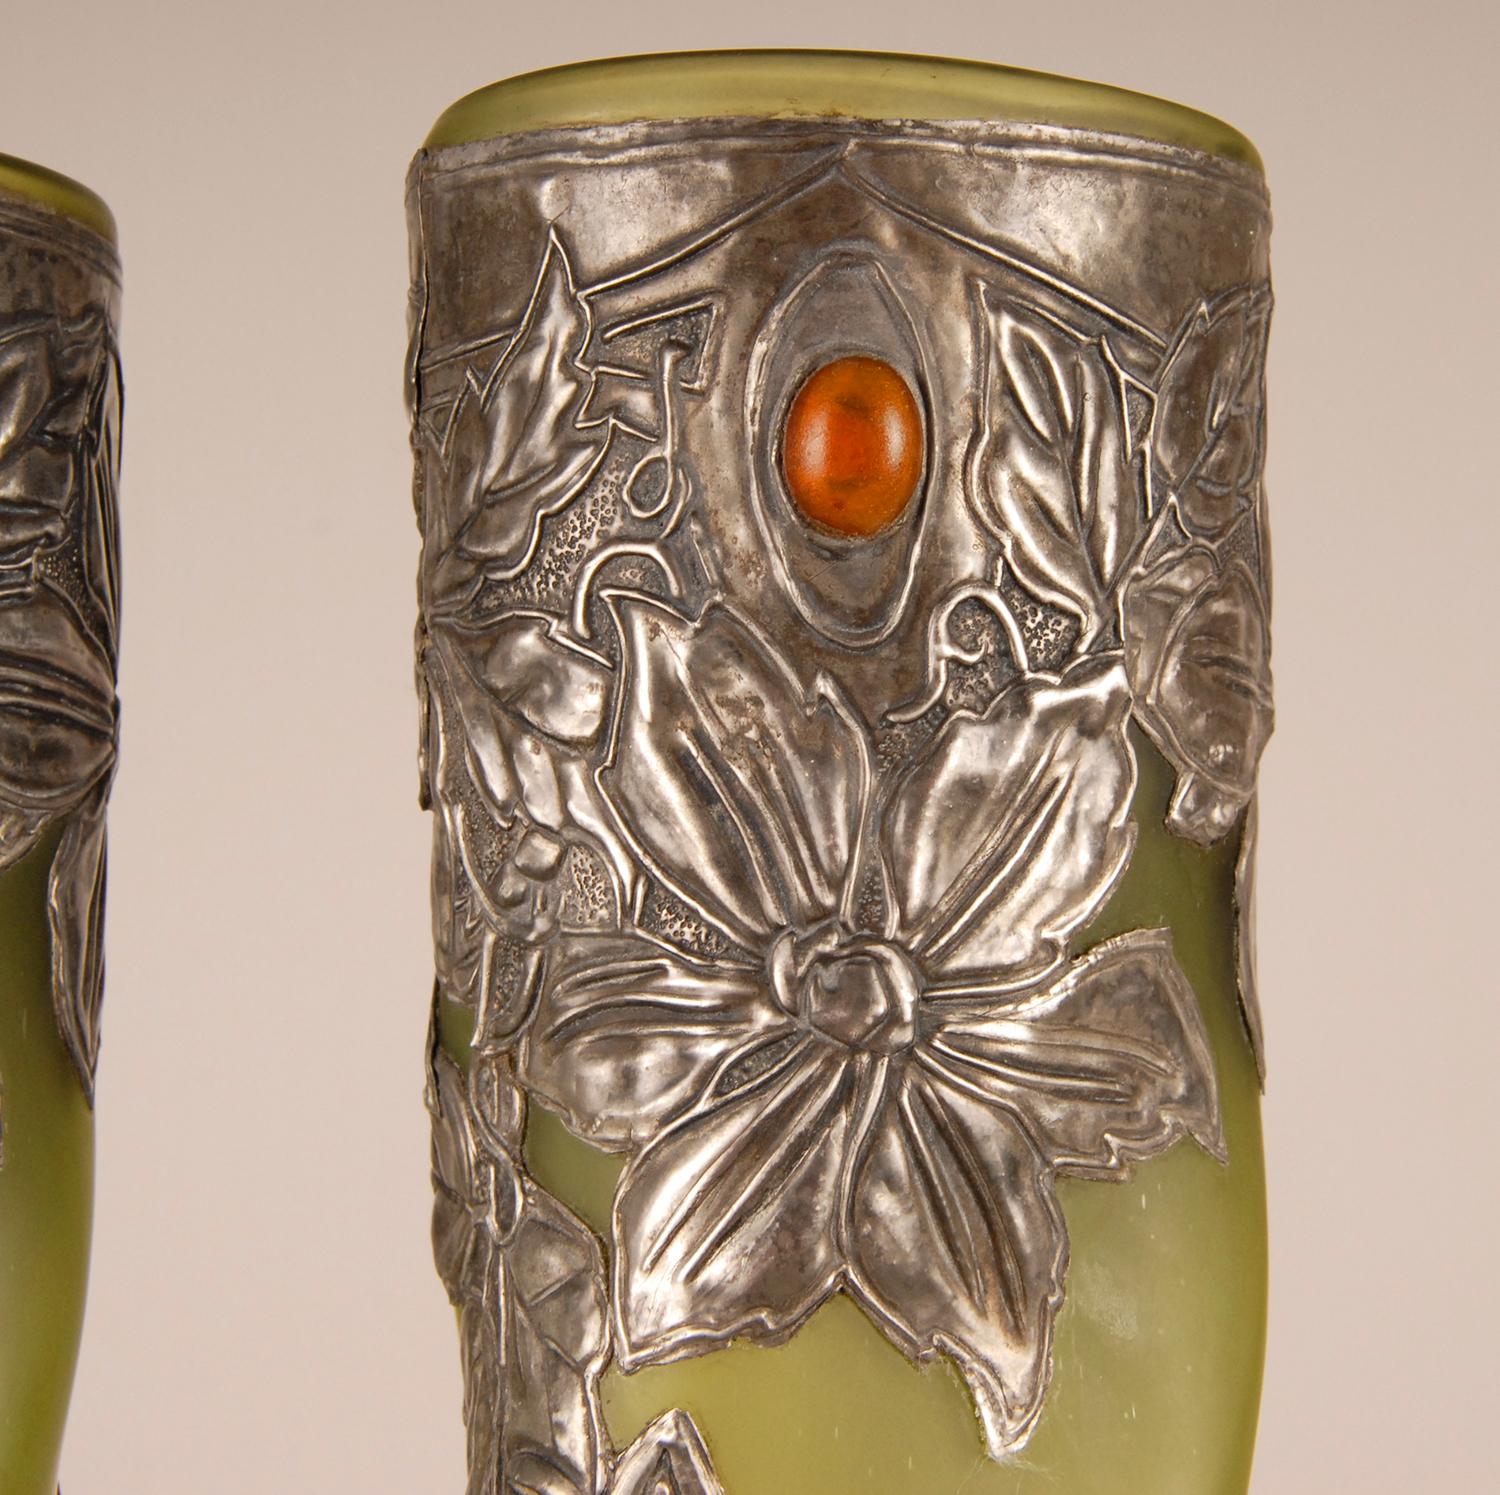 Hand-Crafted French Art Nouveau Green Pate De Verre Pewter and Glass Paste Jewelled Vases For Sale